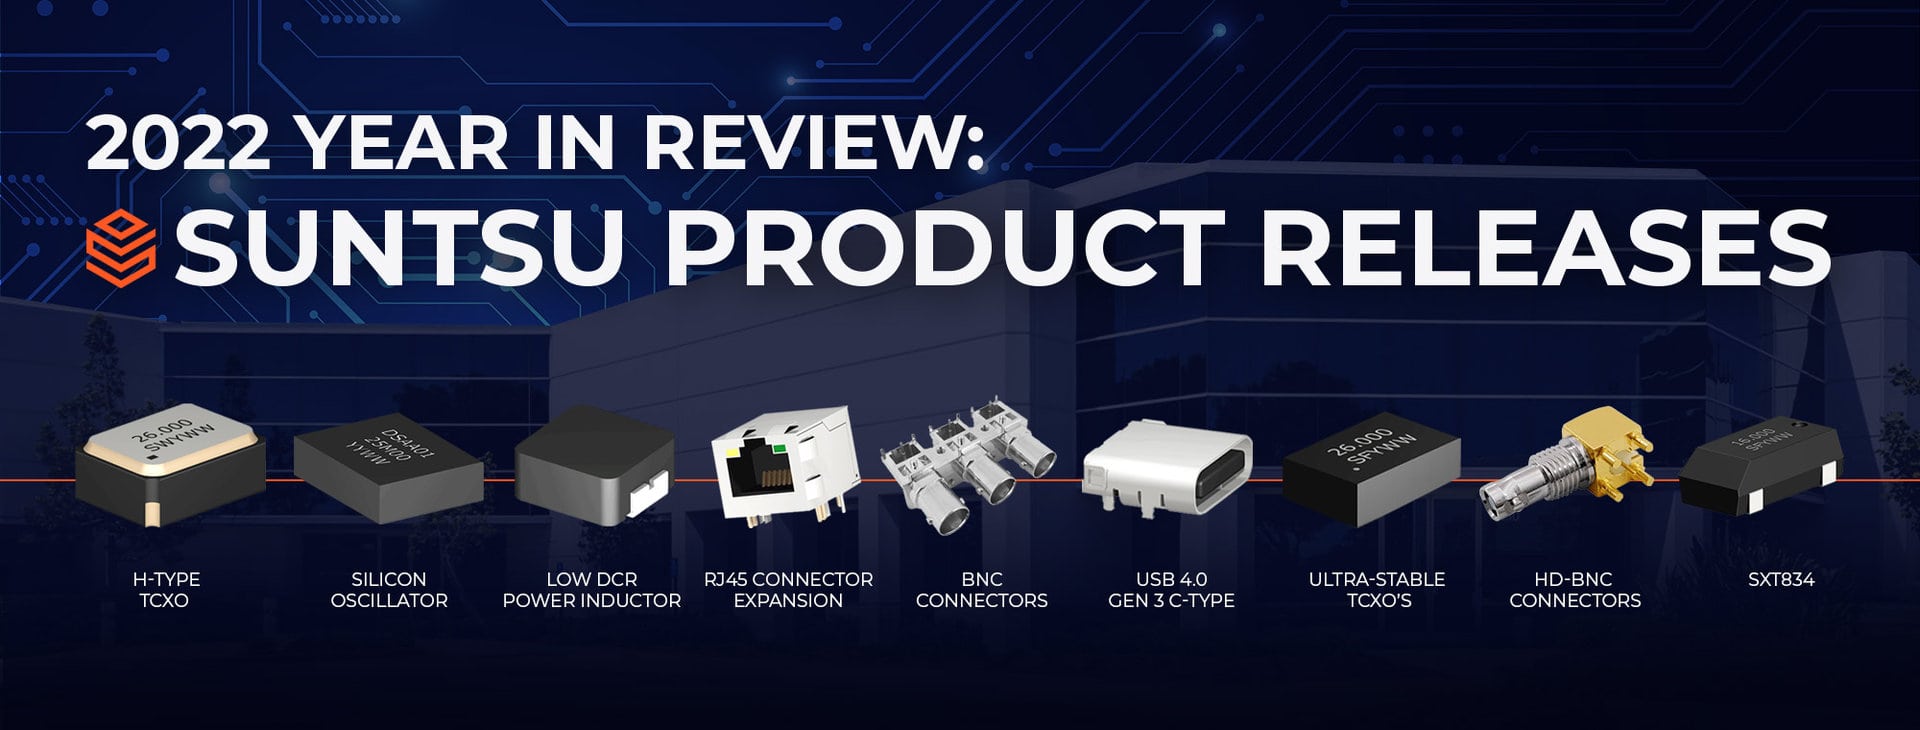 2022 Year in Review: Suntsu Product Releases